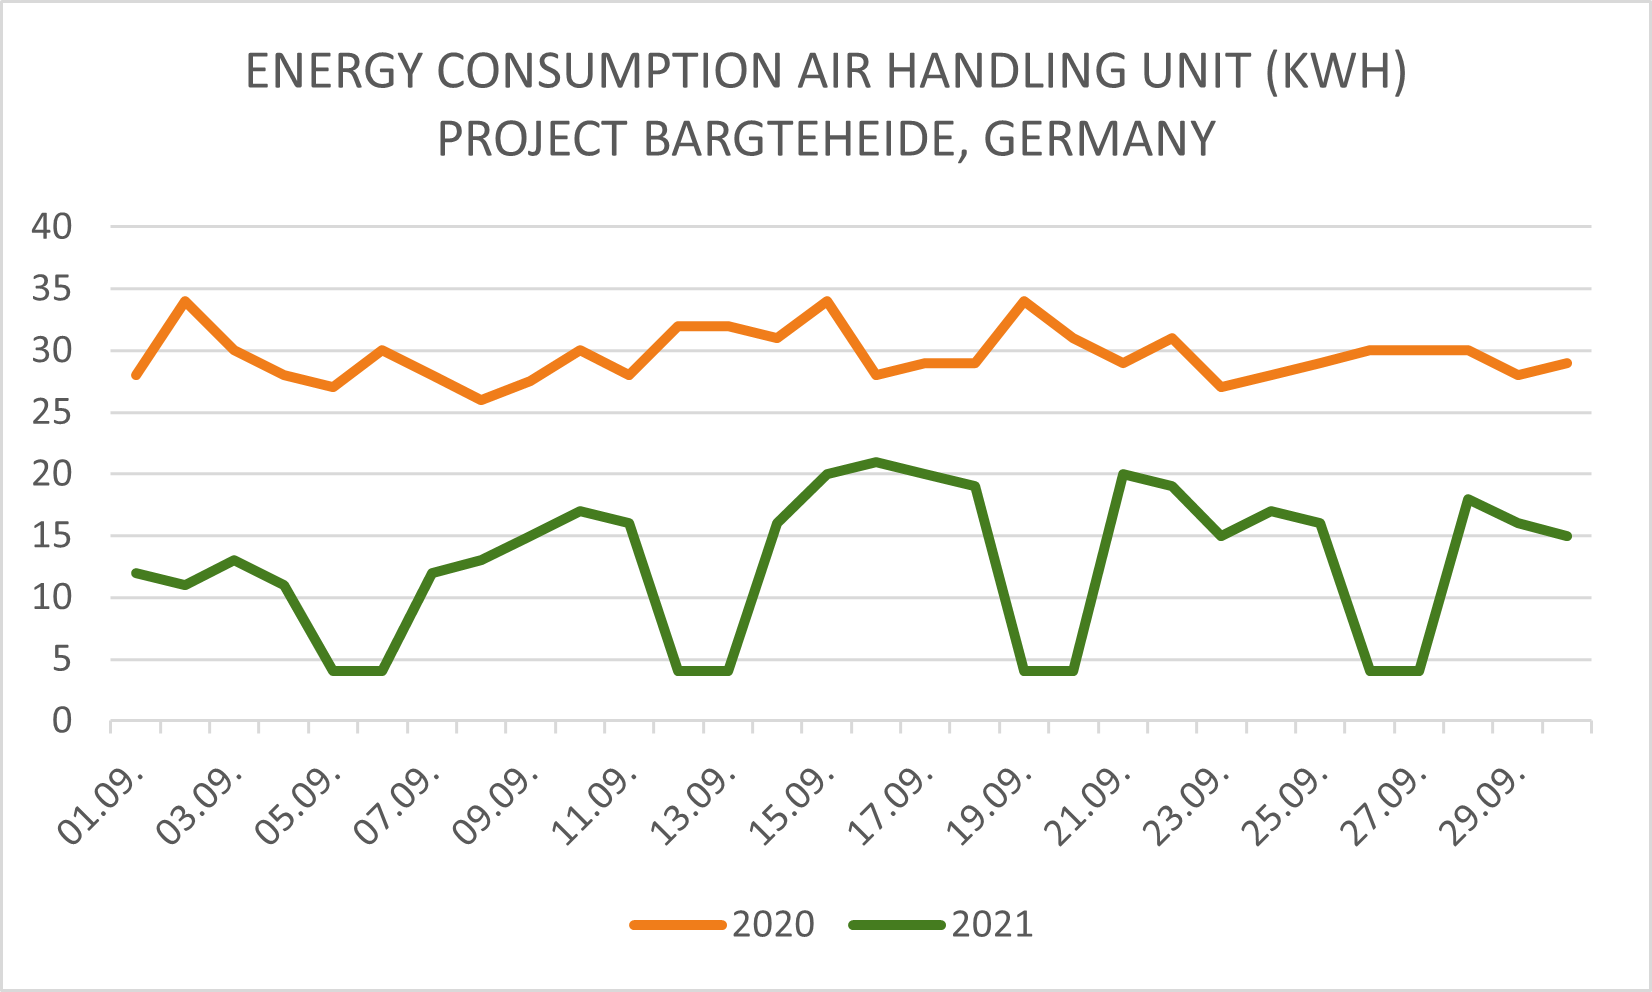 Figure 1: Energy consumption Air Handling Unit in comparison of September 2020 and September 2021, Office project in Bargteheide, Germany. Orange line shows the energy consumption before renovation (constant airflow according to design) and green line shows the energy consumption after renovation (Variable airflow with DCV)